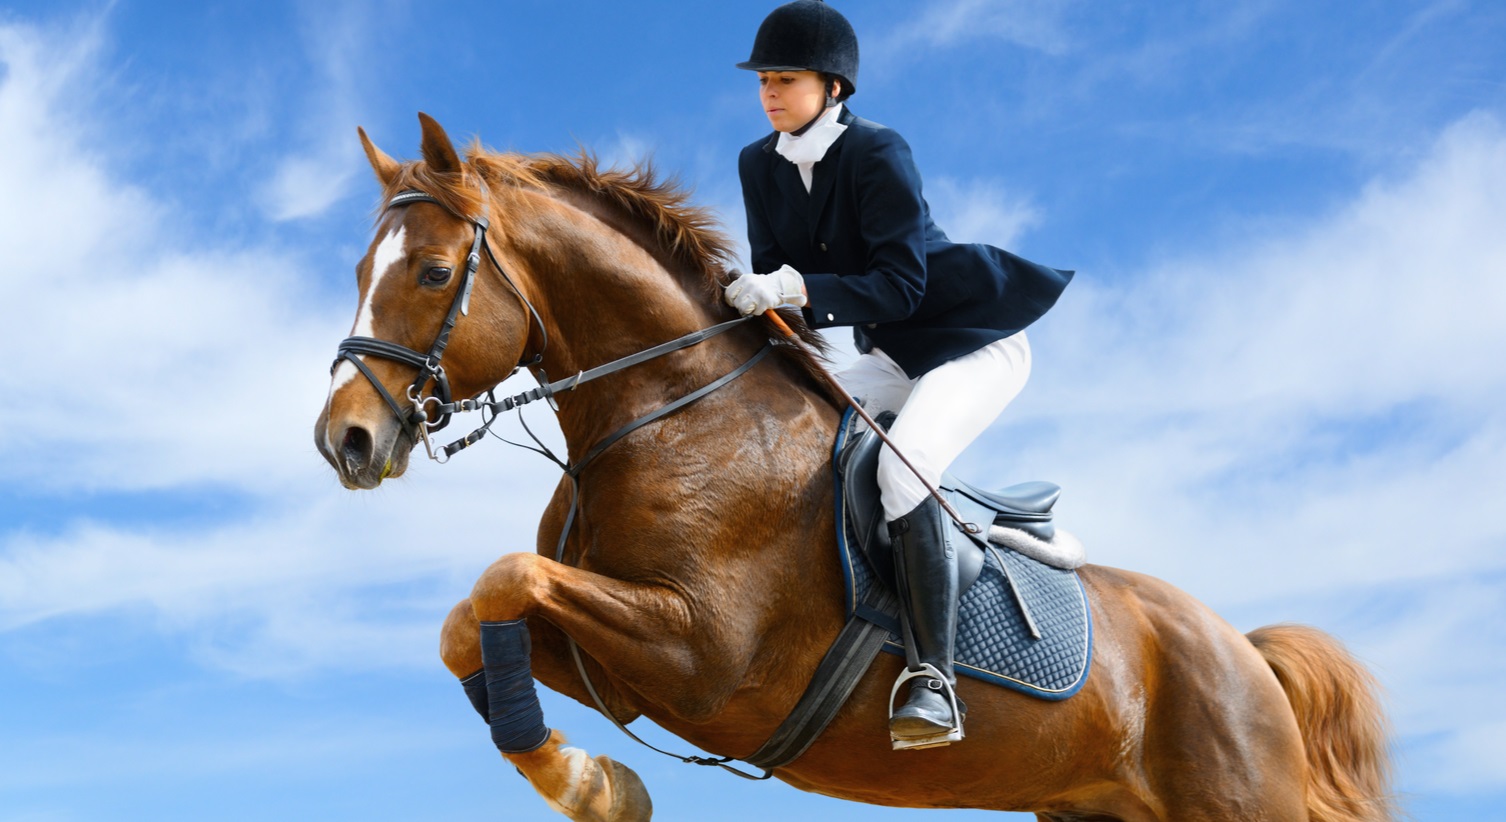 Traits good horse riders have